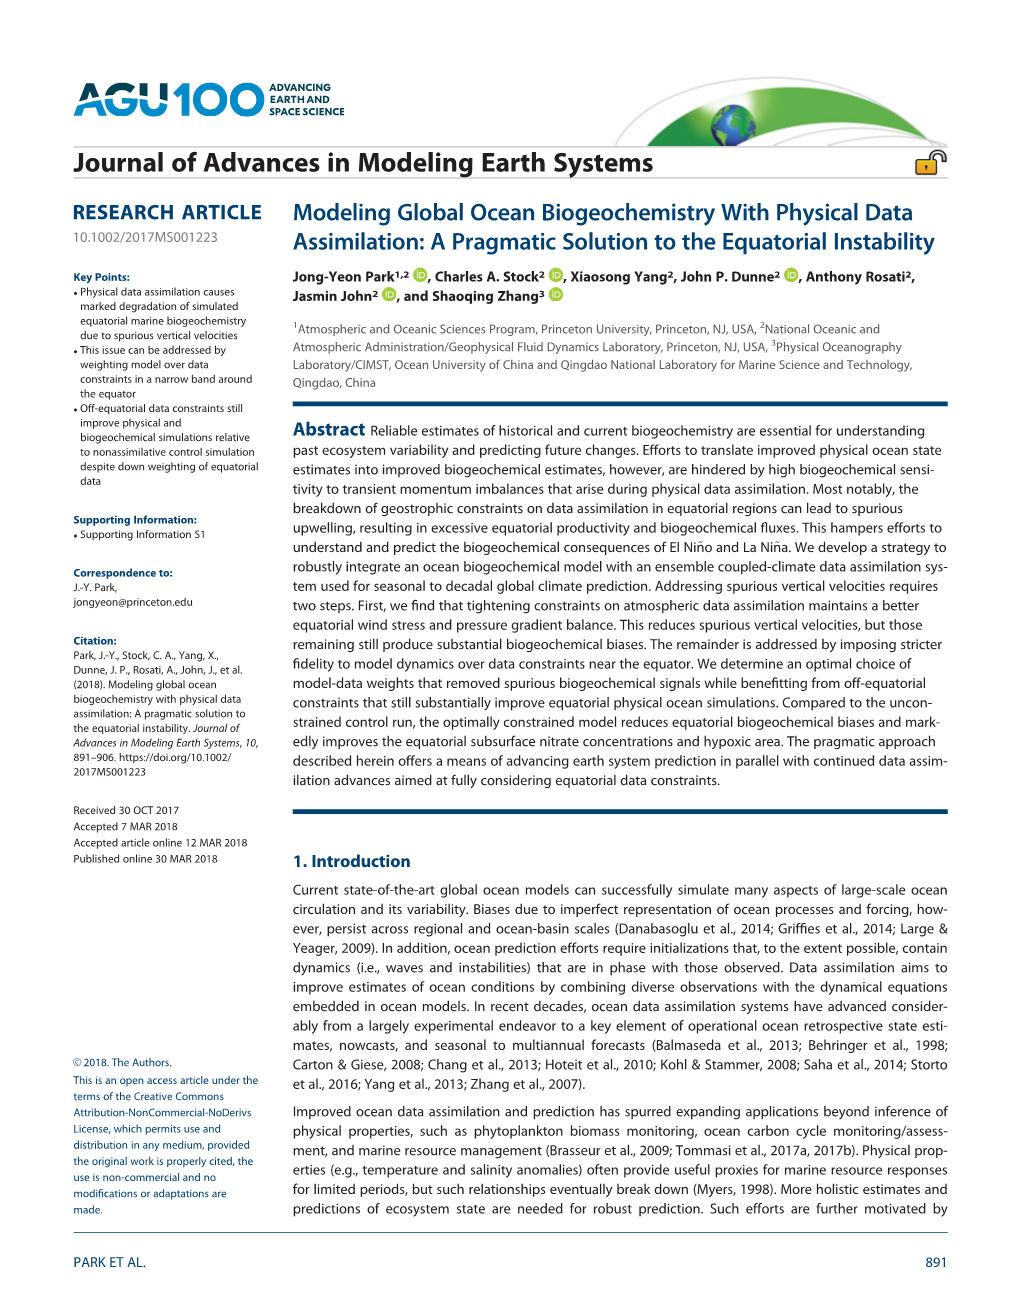 Modeling Global Ocean Biogeochemistry with Physical Data Assimilation: a Pragmatic Solution to the Equatorial Instability